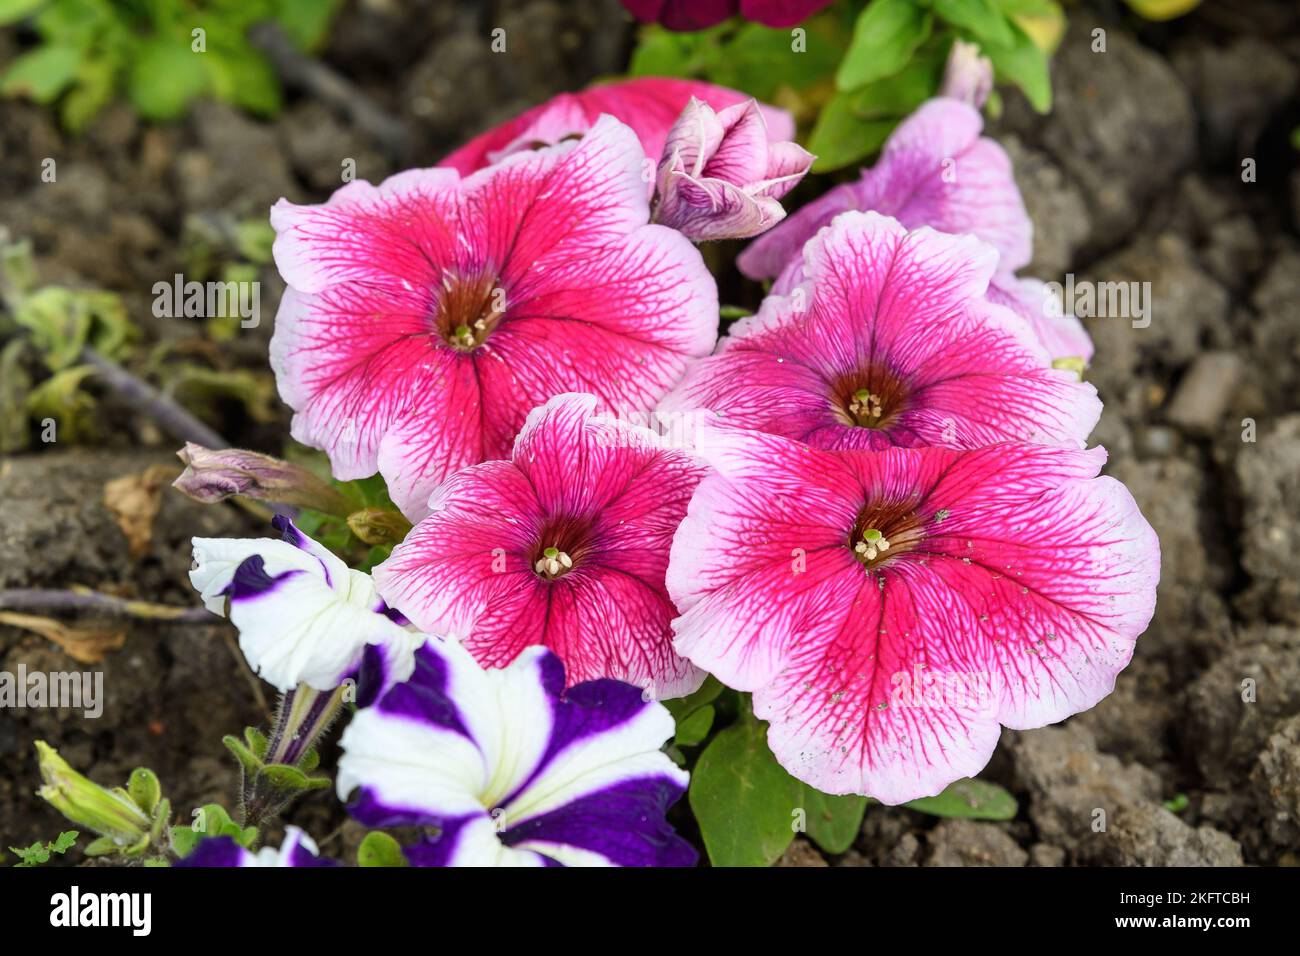 Large group of Petunia axillaris light white and pink flowers in a pot, with blurred background in a garden in a sunny spring day Stock Photo